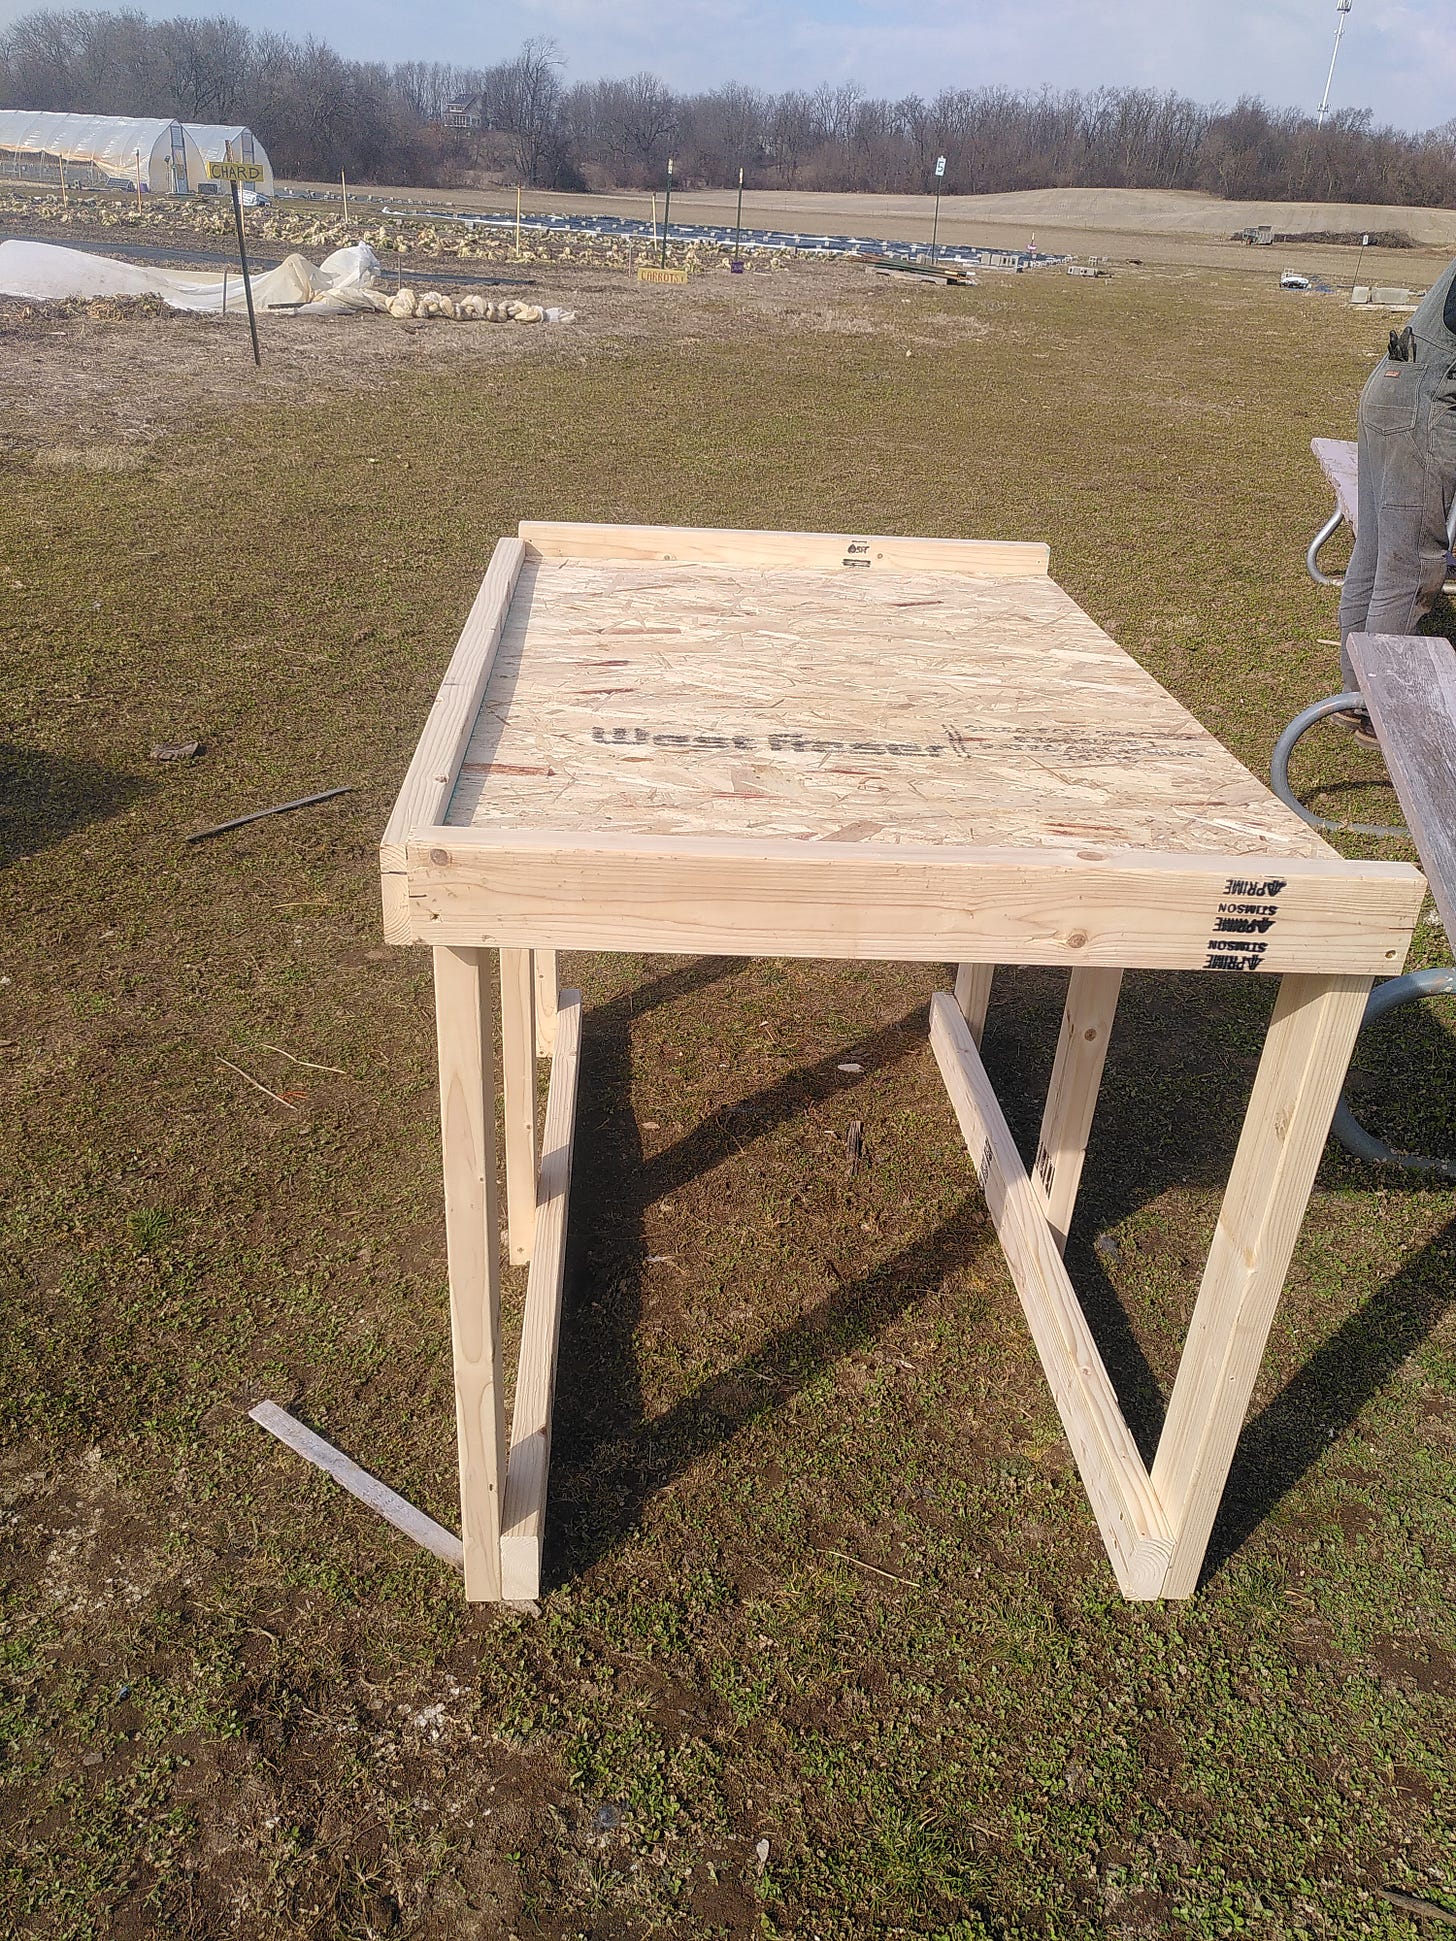 A table madde out of plywood and 2x4s outside on a farm.